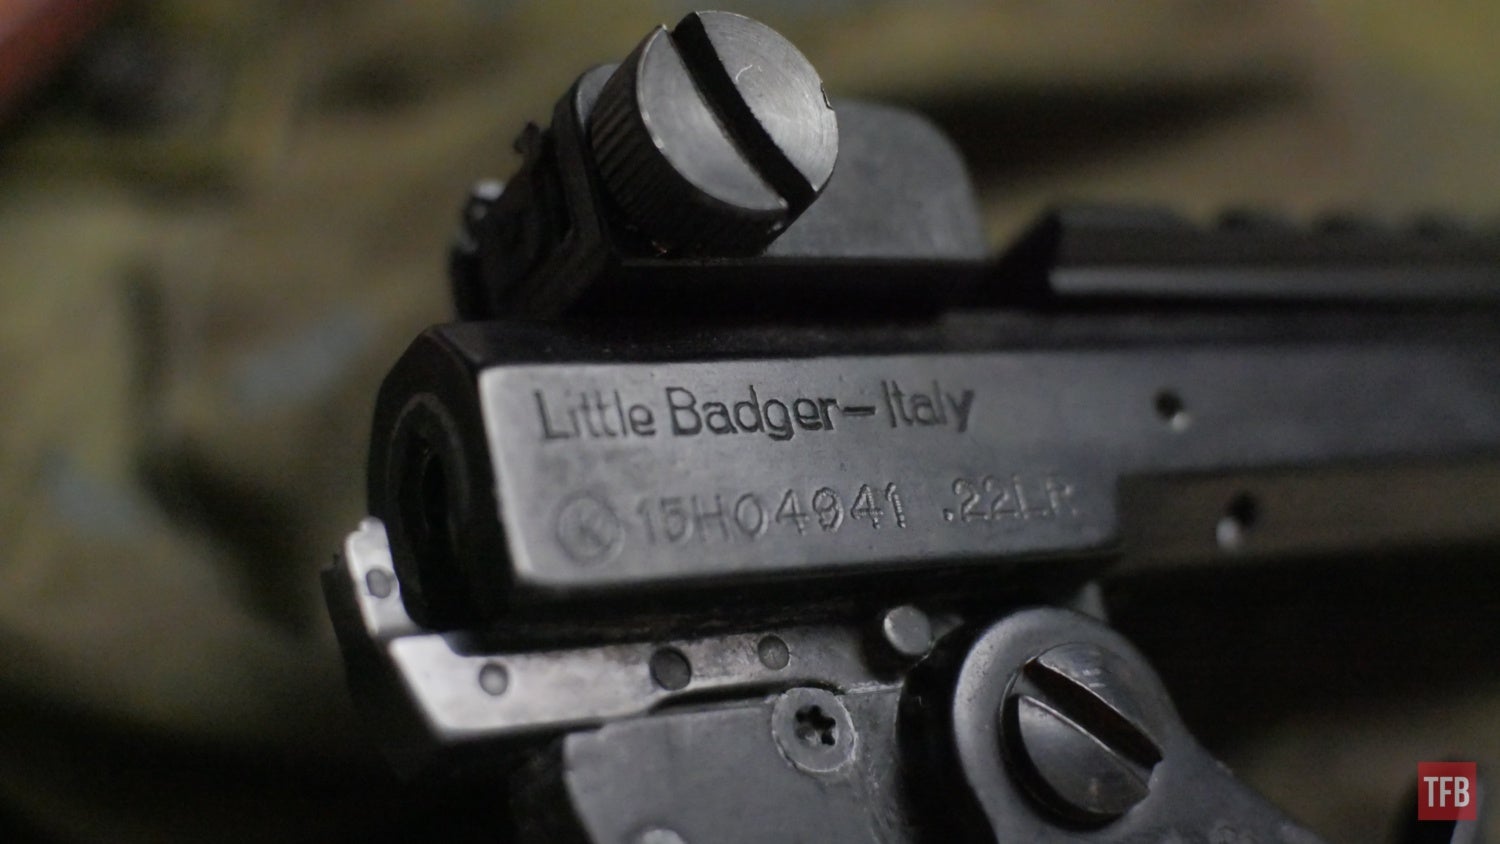 The Rimfire Report: Italy's Chiappa Little Badger 22LR Survival Rifle